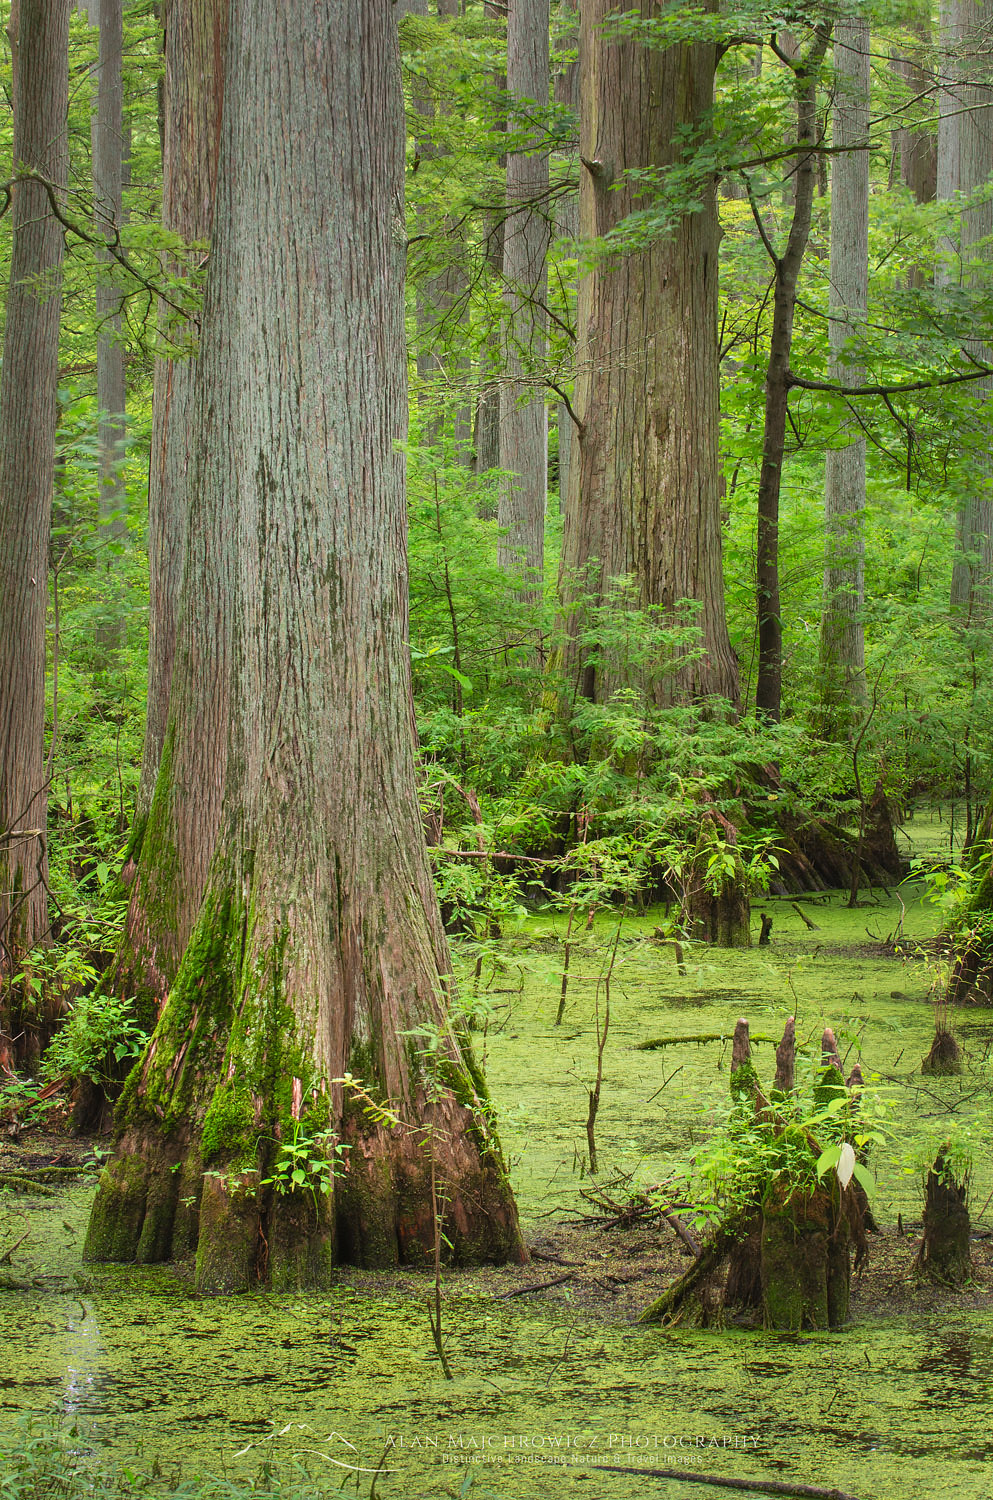 Cypress trees in Heron Pond, Cache River State Natural Area Illinois #63107